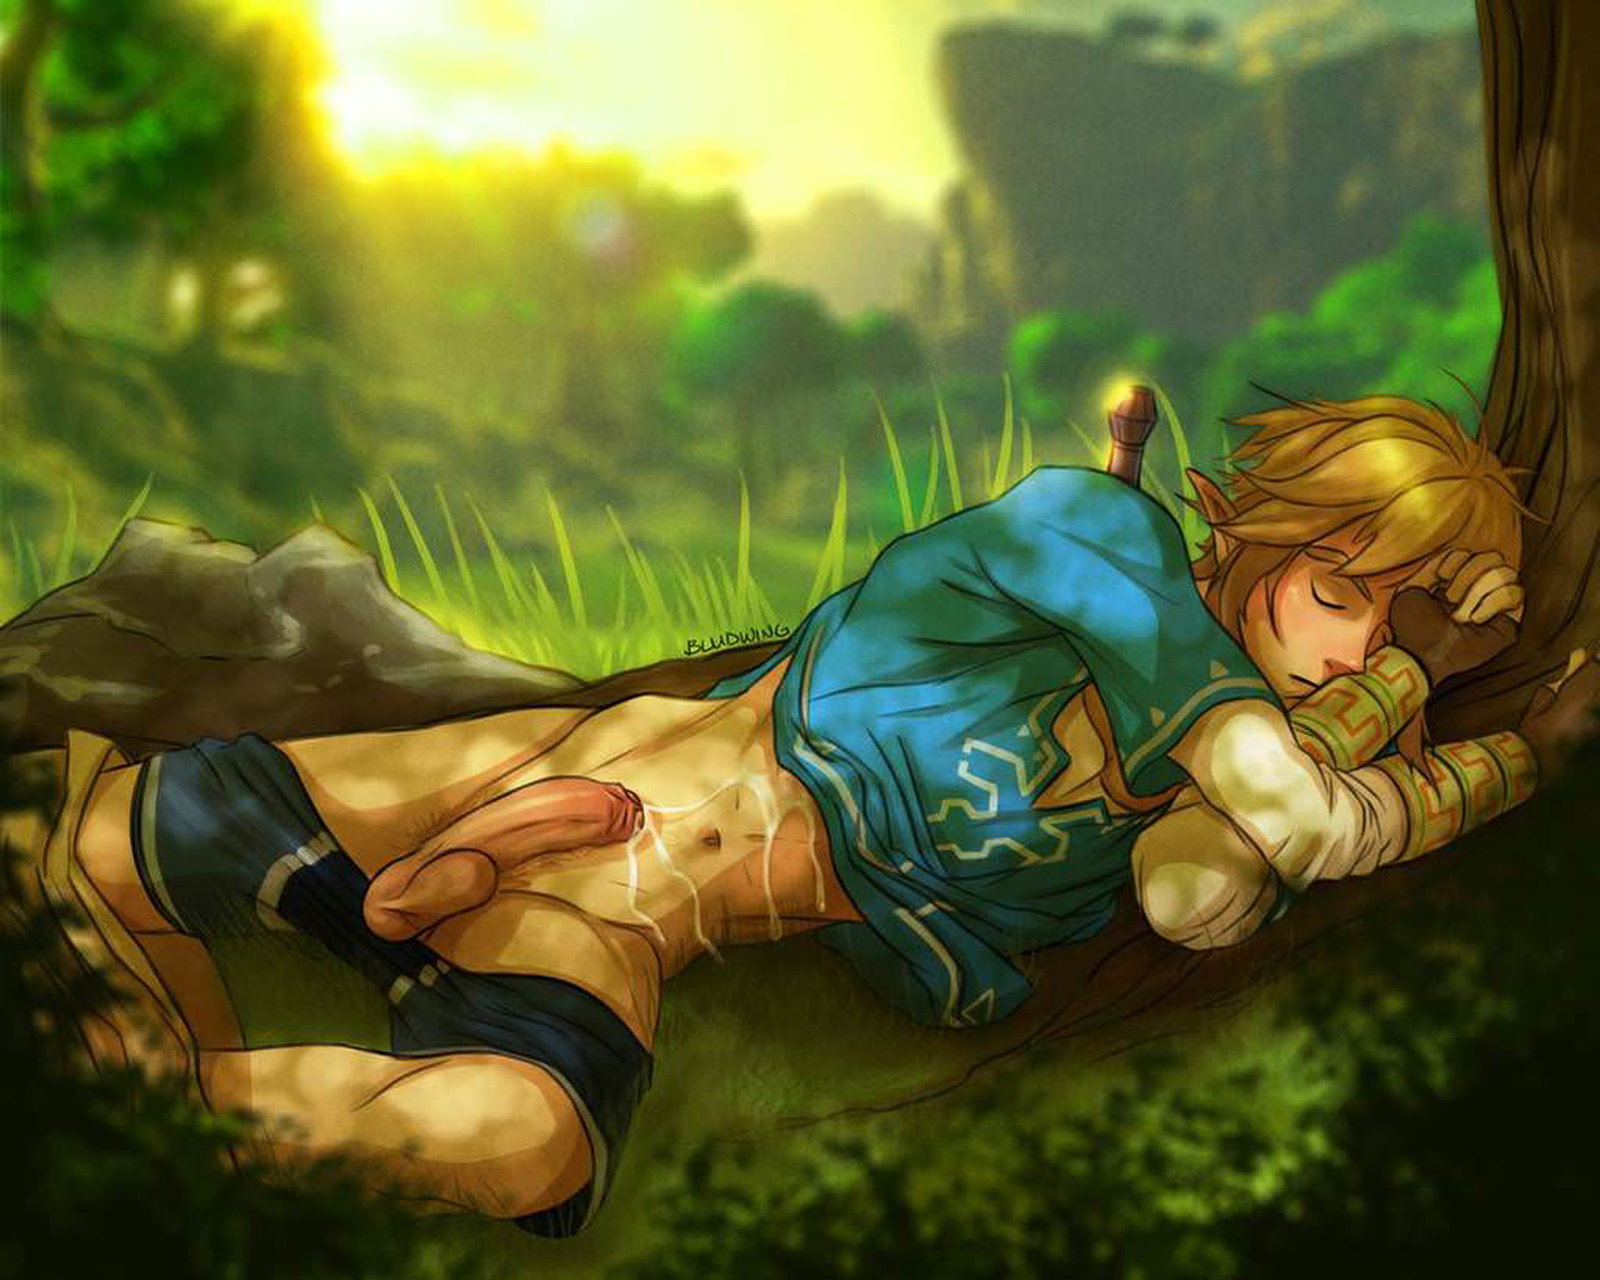 Watch the Photo by ardor with the username @Ardor, posted on December 9, 2018. The post is about the topic Yaoi. and the text says 'Link resting after having what seems like a pretty good time. Breath of the Wild's Link is the horniest of them all, probably'